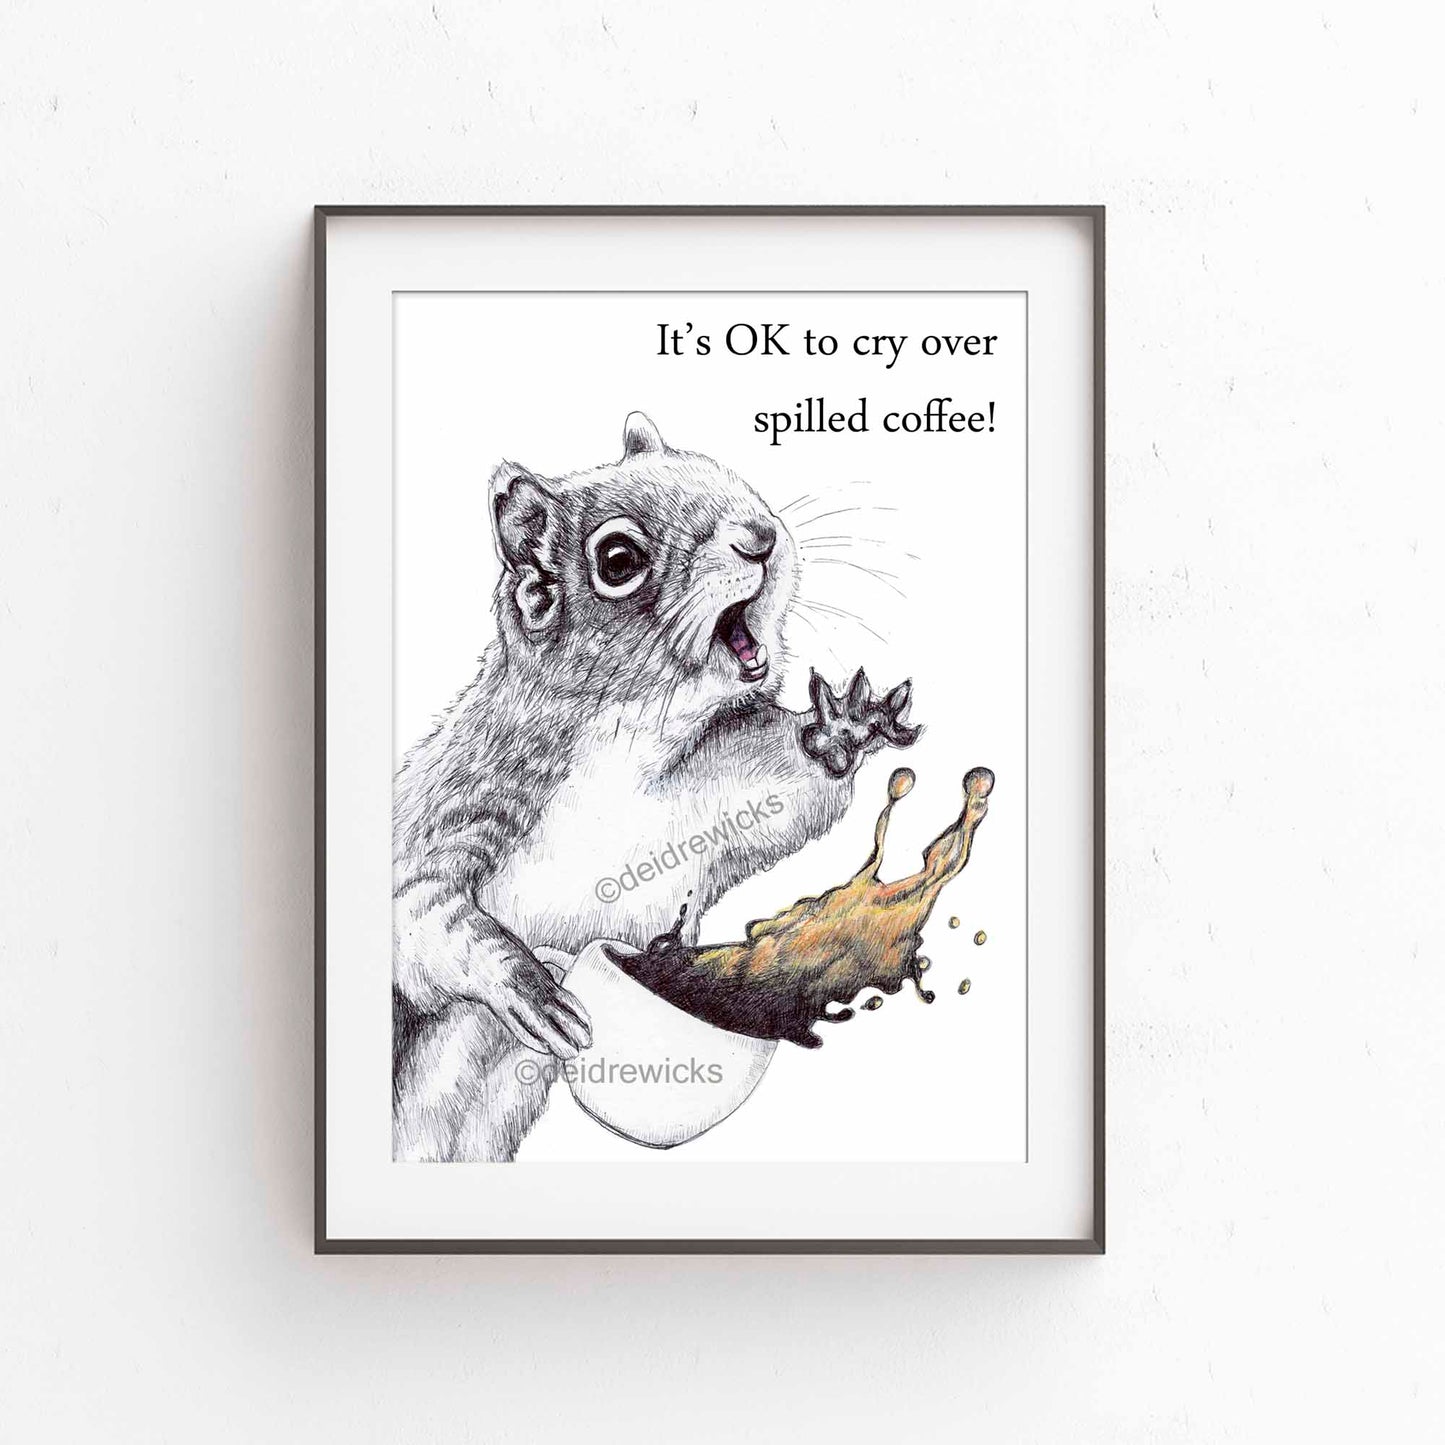 Framed example of a print of an original ballpoint pen illustration of a squirrel about to spill it's coffee. By Deidre Wicks